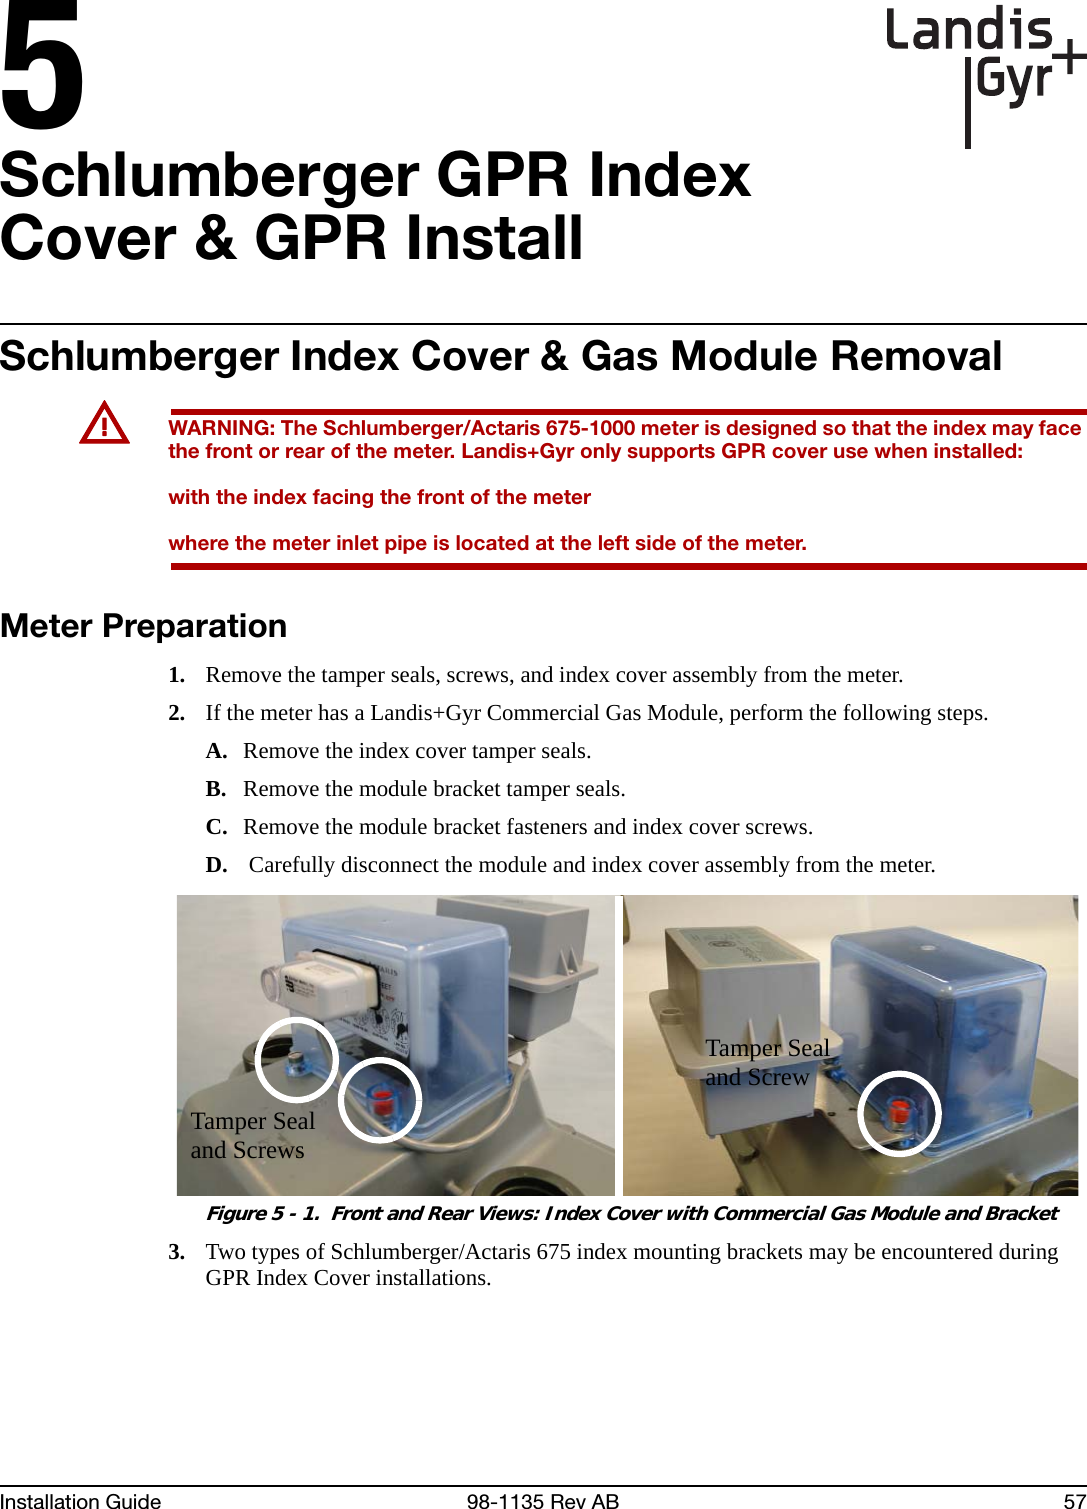 5Installation Guide 98-1135 Rev AB 57Schlumberger GPR Index Cover &amp; GPR InstallSchlumberger Index Cover &amp; Gas Module RemovalUWARNING: The Schlumberger/Actaris 675-1000 meter is designed so that the index may face the front or rear of the meter. Landis+Gyr only supports GPR cover use when installed:with the index facing the front of the meterwhere the meter inlet pipe is located at the left side of the meter.Meter Preparation1. Remove the tamper seals, screws, and index cover assembly from the meter.2. If the meter has a Landis+Gyr Commercial Gas Module, perform the following steps.A. Remove the index cover tamper seals.B. Remove the module bracket tamper seals.C. Remove the module bracket fasteners and index cover screws.D.  Carefully disconnect the module and index cover assembly from the meter. Figure 5 - 1.  Front and Rear Views: Index Cover with Commercial Gas Module and Bracket3. Two types of Schlumberger/Actaris 675 index mounting brackets may be encountered during GPR Index Cover installations.Tamper Seal and ScrewTamper Seal and Screws